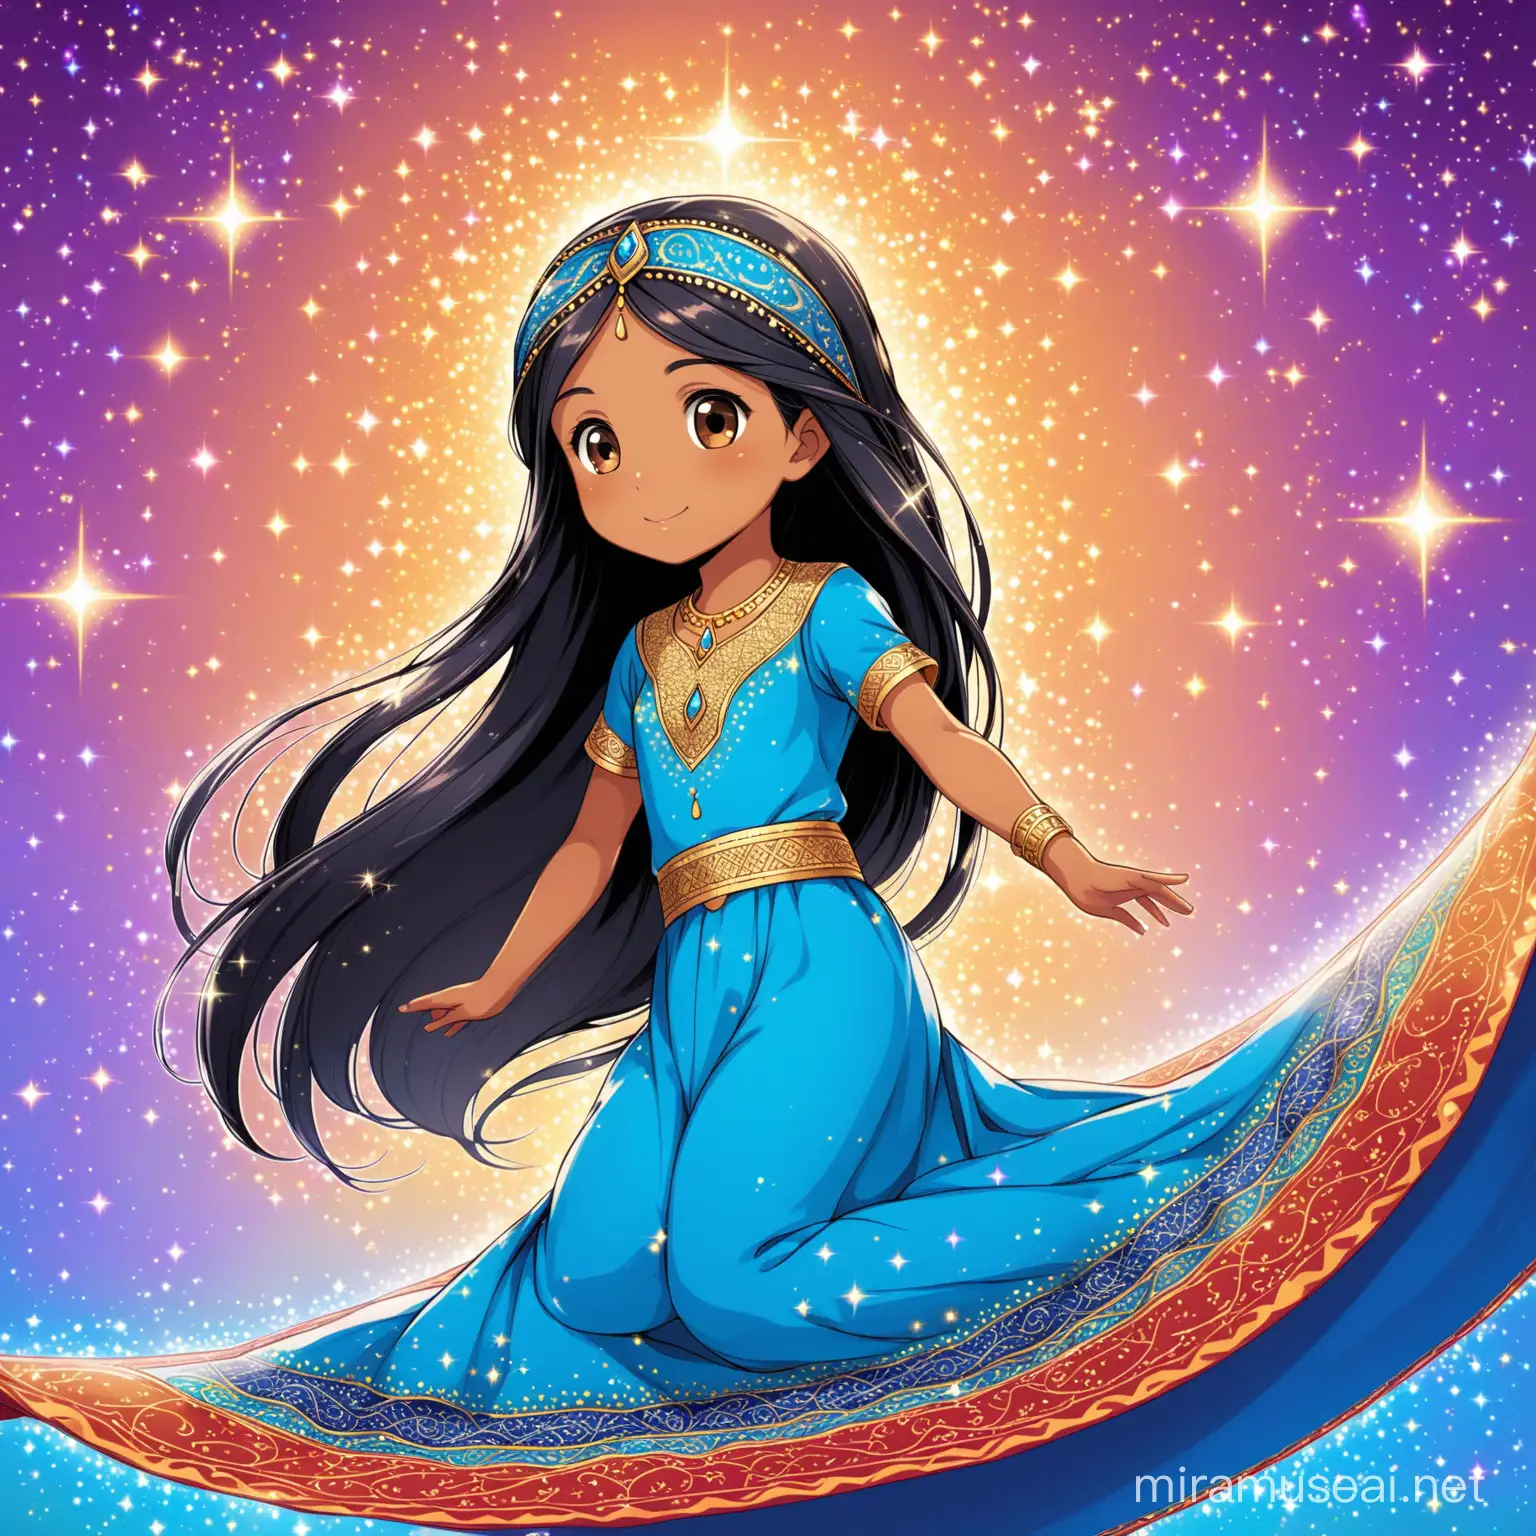 a 9 year old tan girl with long black straight hair with sparkles in her hair wearing a blue arabian dress with a blue arabian headband flying on a magic carpet